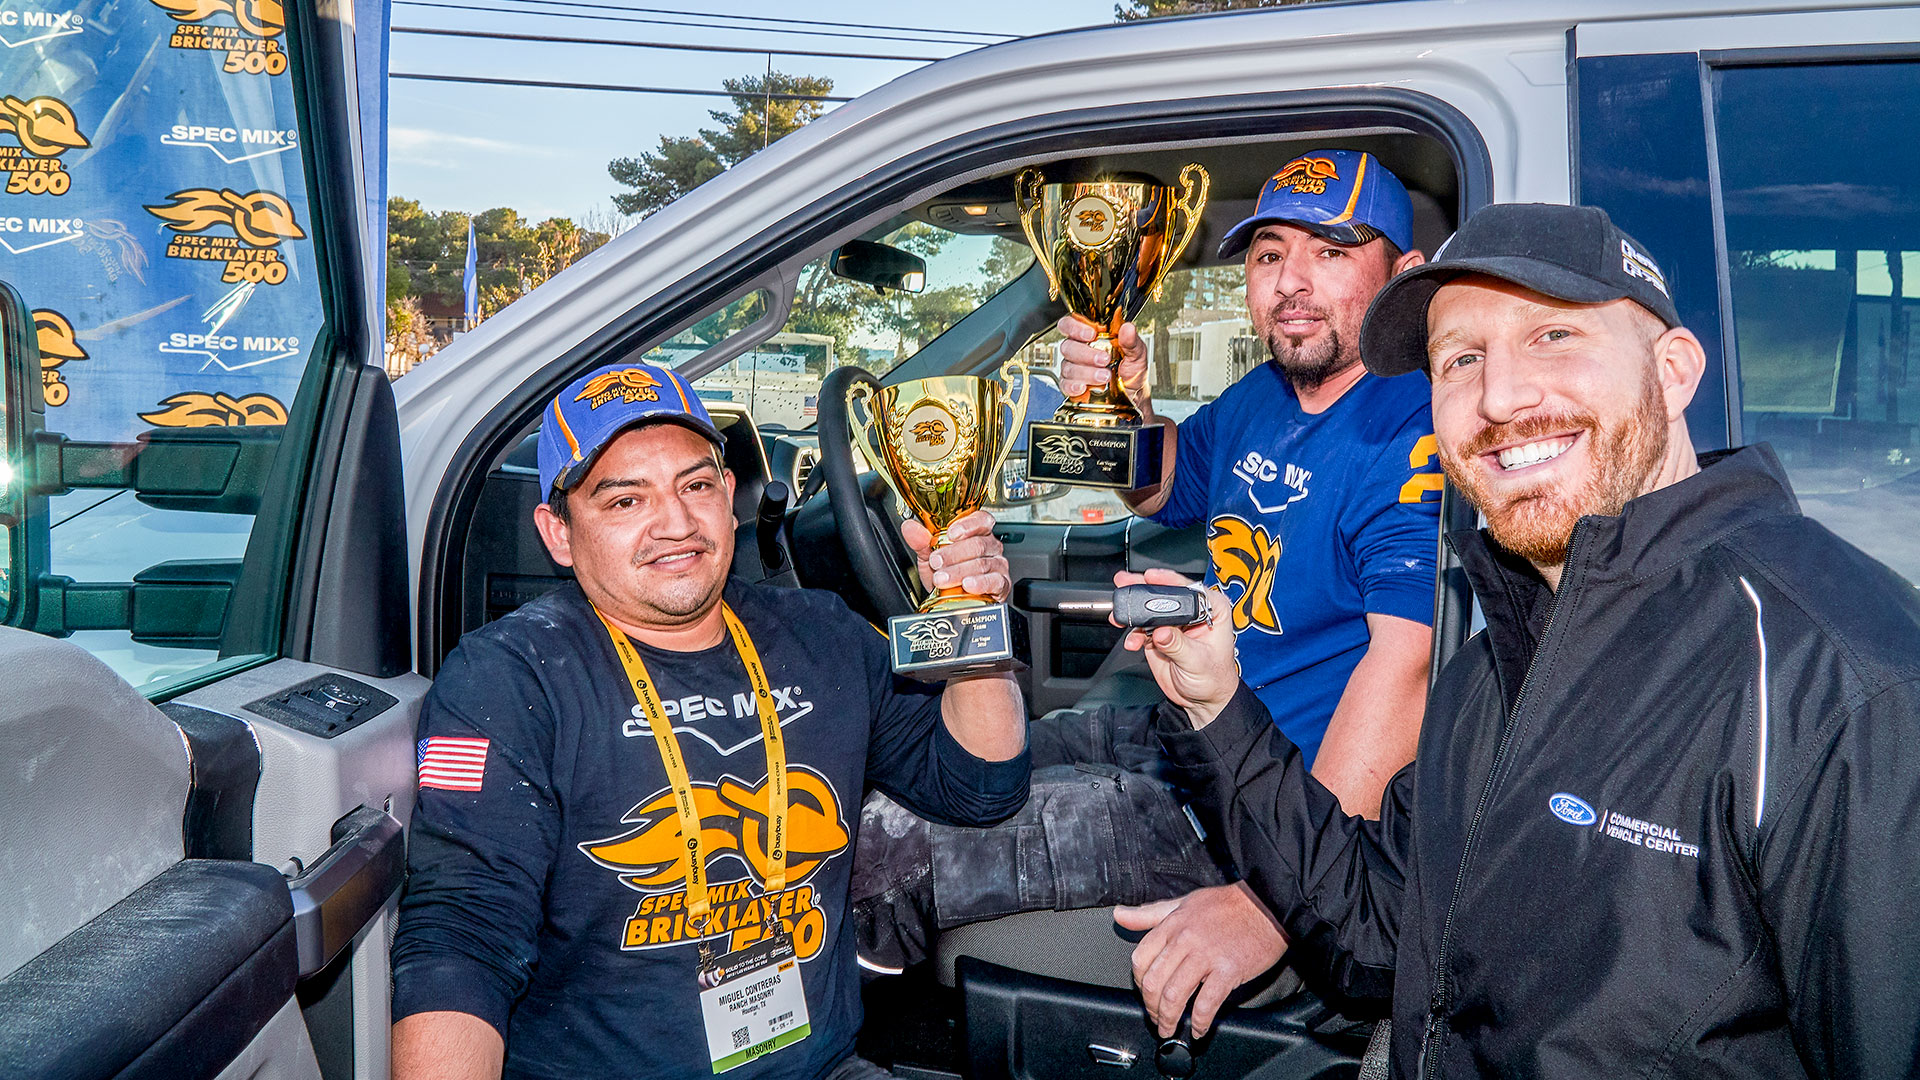 Cory Belonzi (right) with Ford Commercial Vehicles hands over the keys to a 2018 Ford F-250 Super Duty Truck to World Champion David Chavez (middle) as he holds up the SPEC MIX BRICKLAYER 500® World Championship ceremonial trophy.